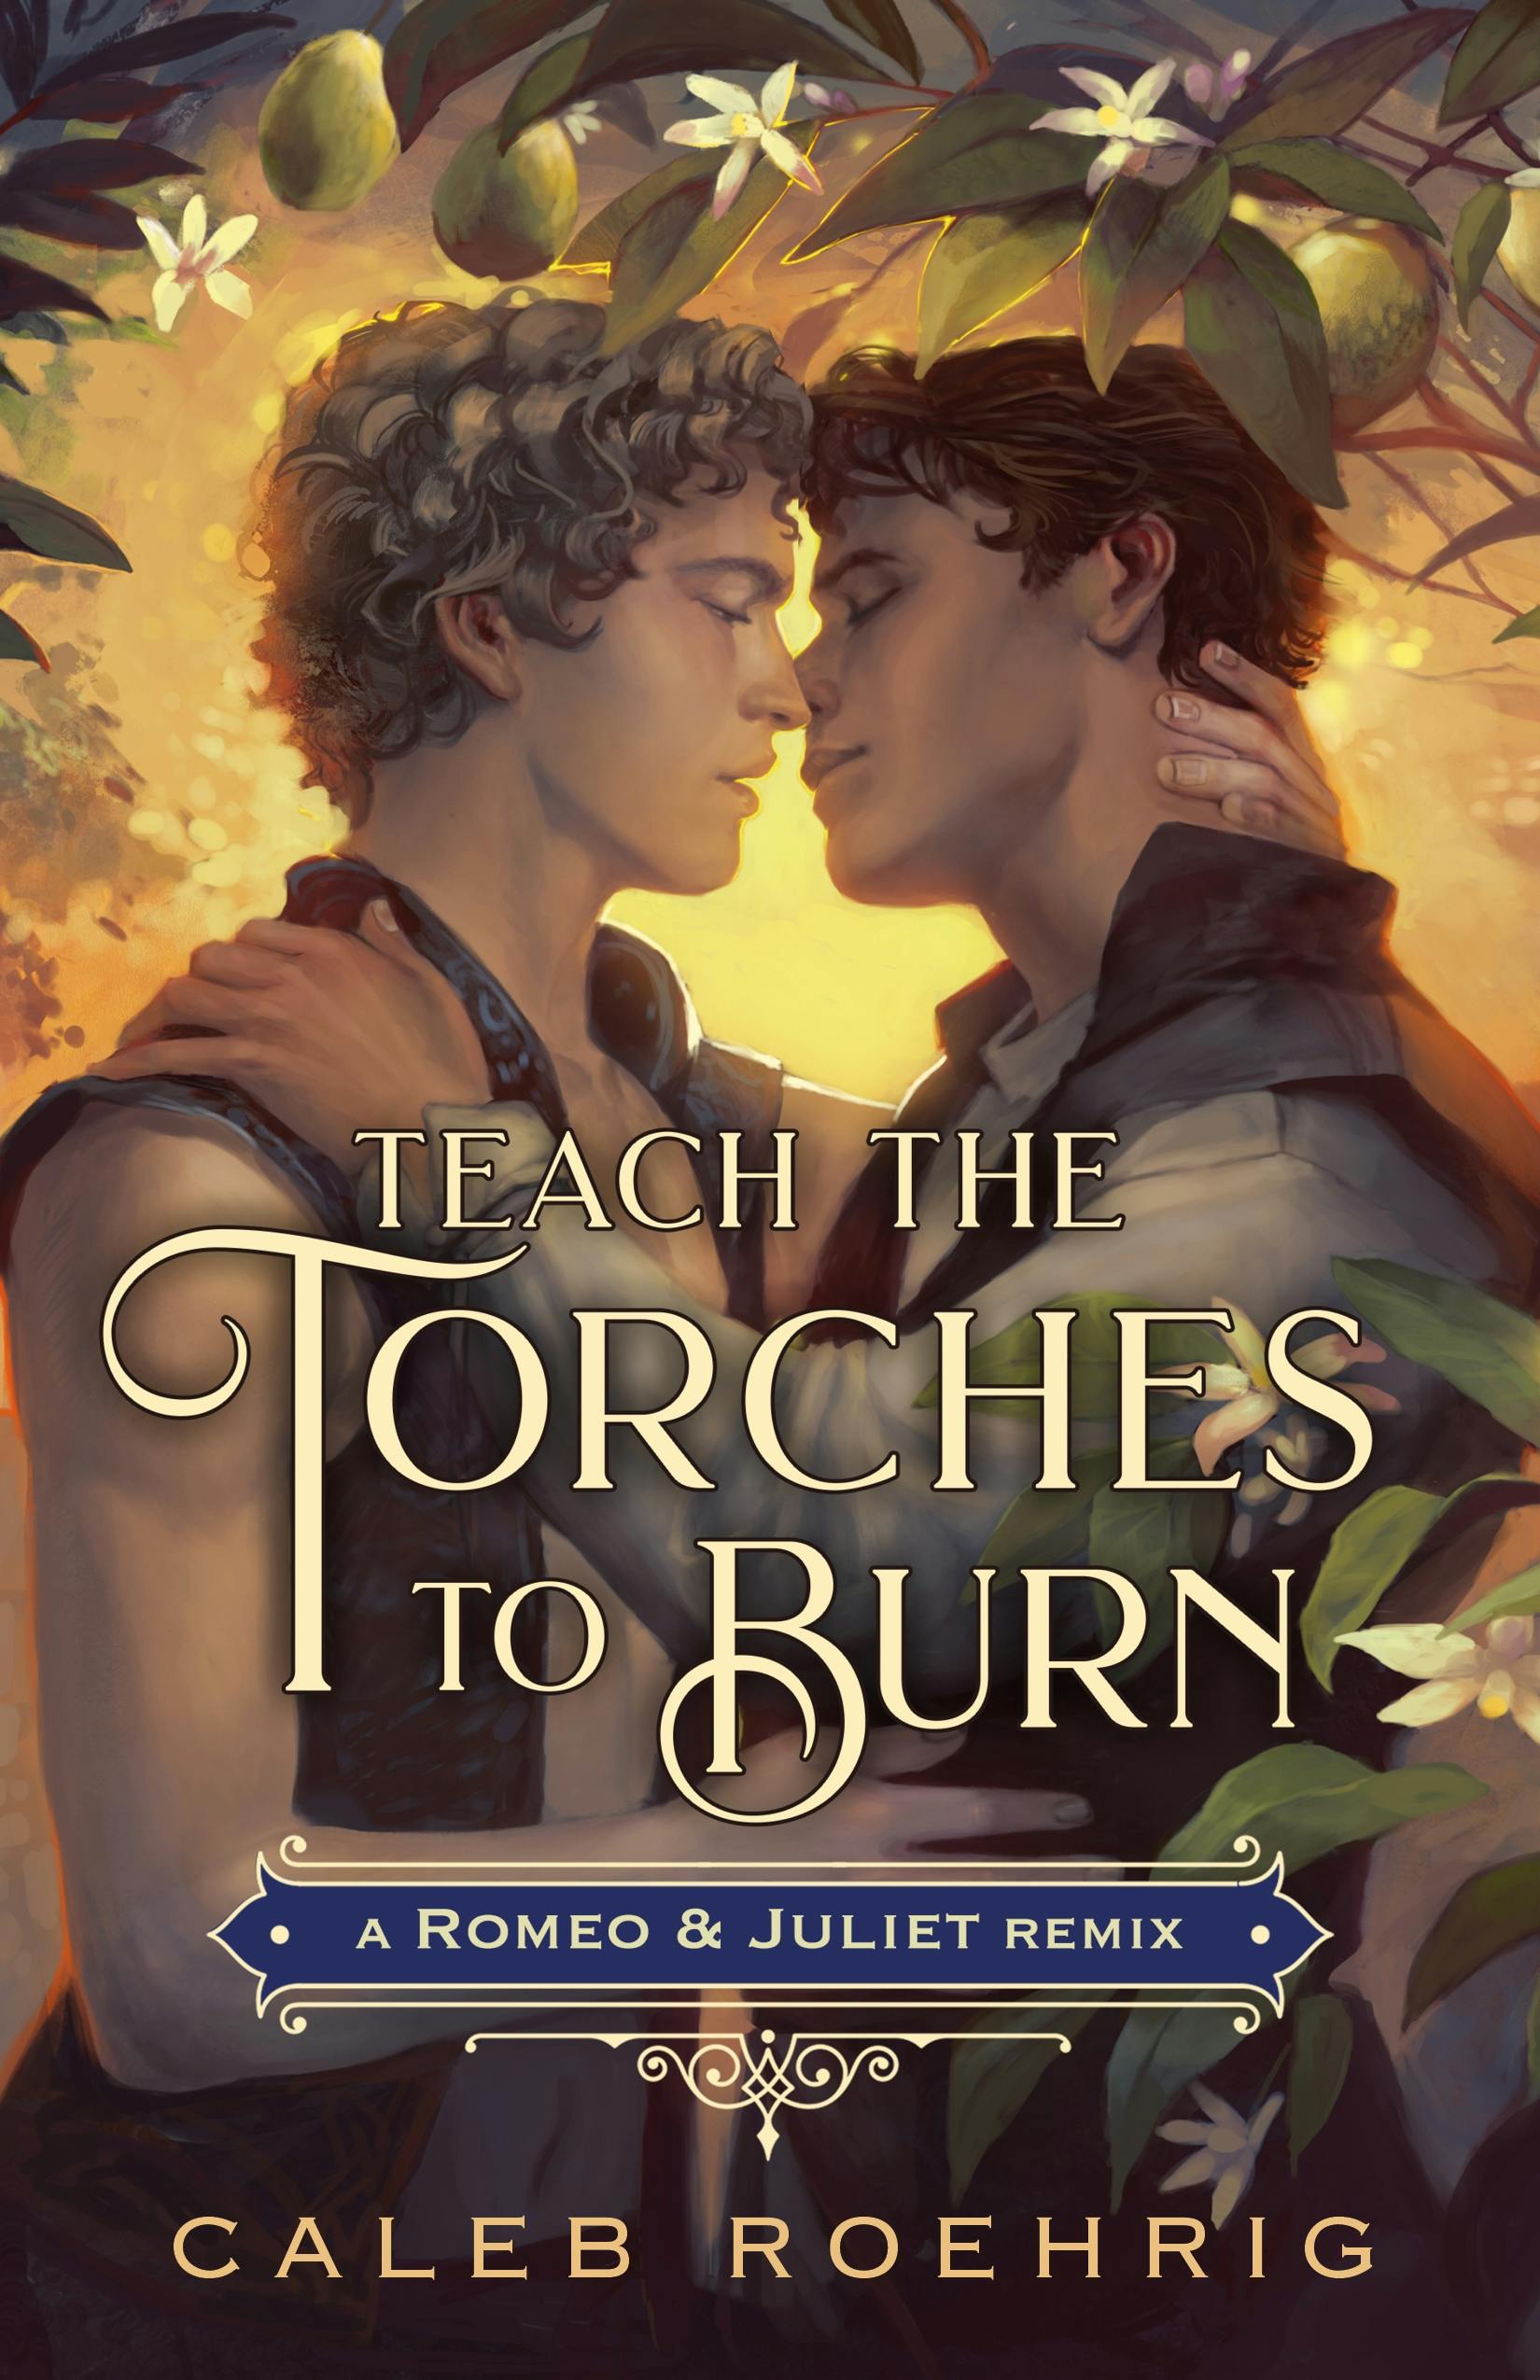 Teach the Torches to Burn A Romeo and Juliet Remix photo